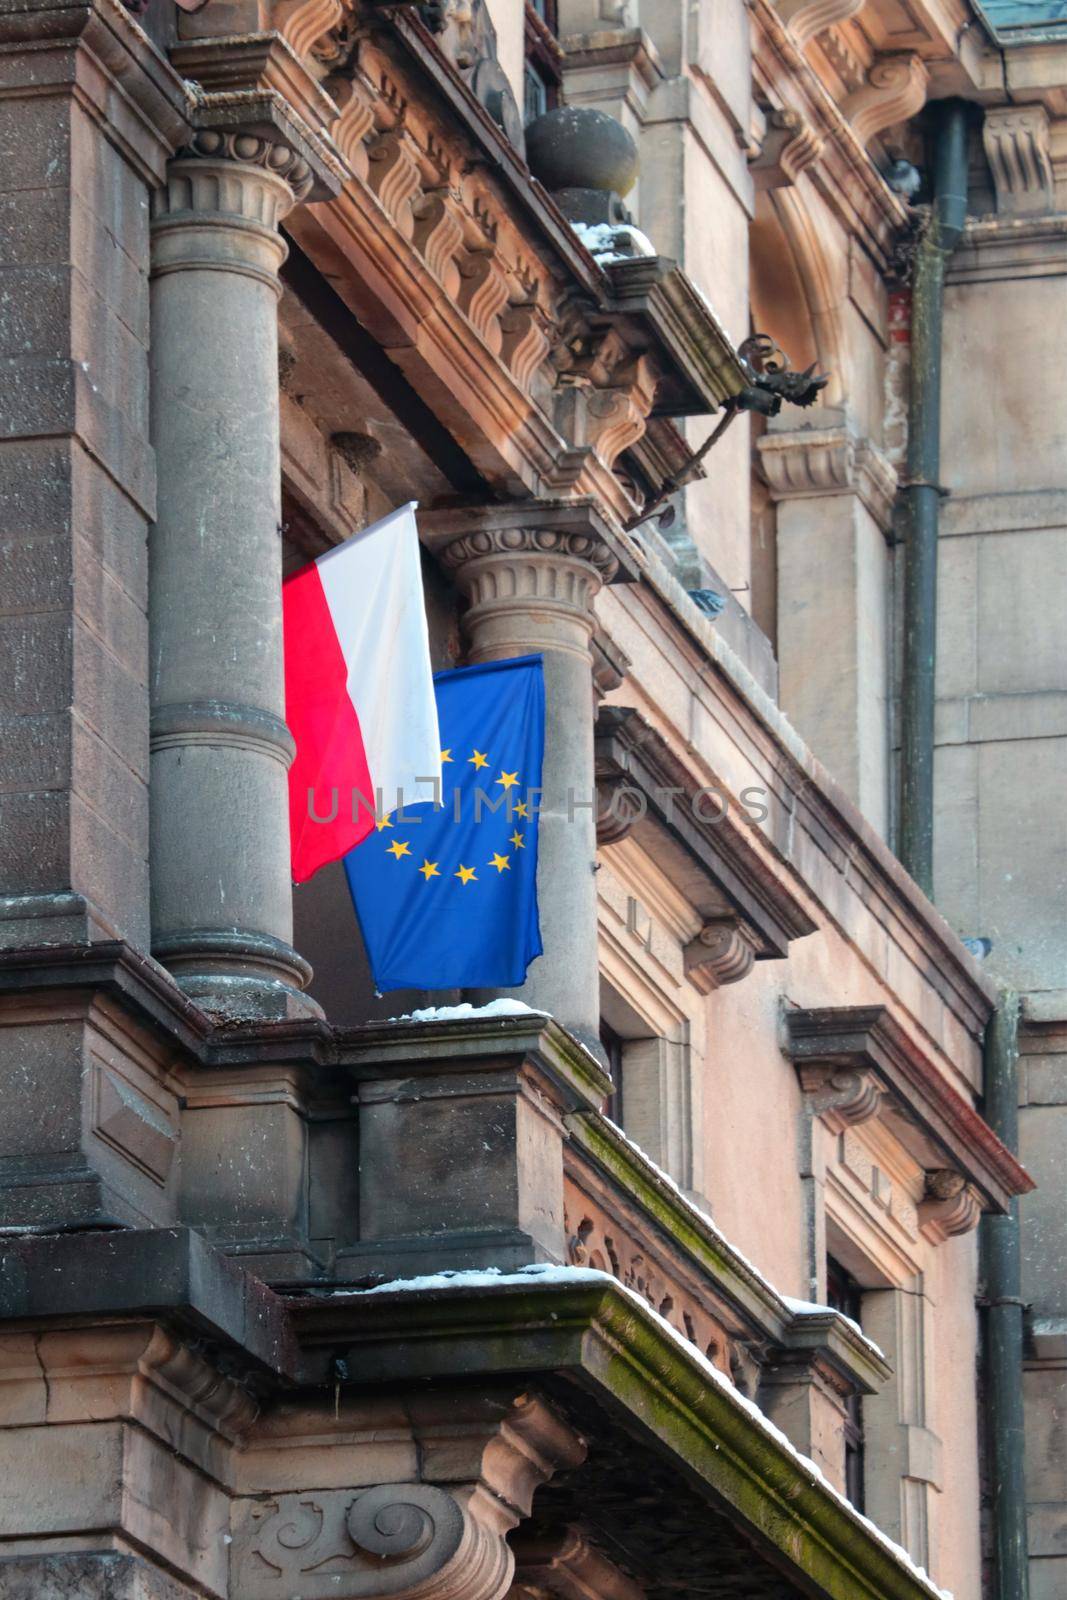 The flags of Poland and the European Union are hung on the building. by kip02kas